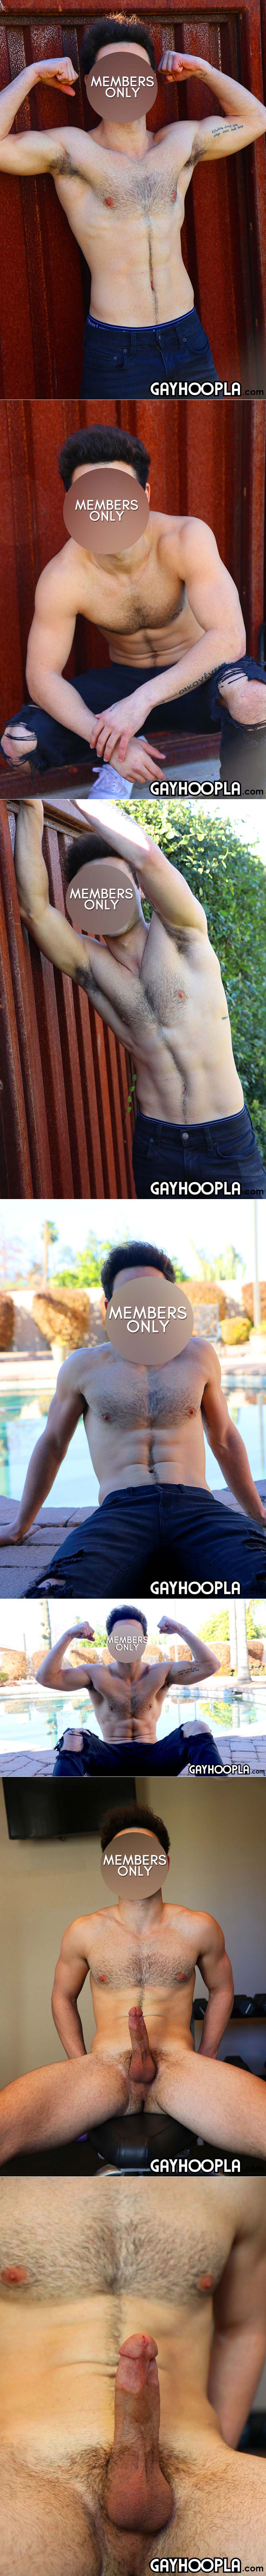 Mystery Members Only Model #16 at GayHoopla